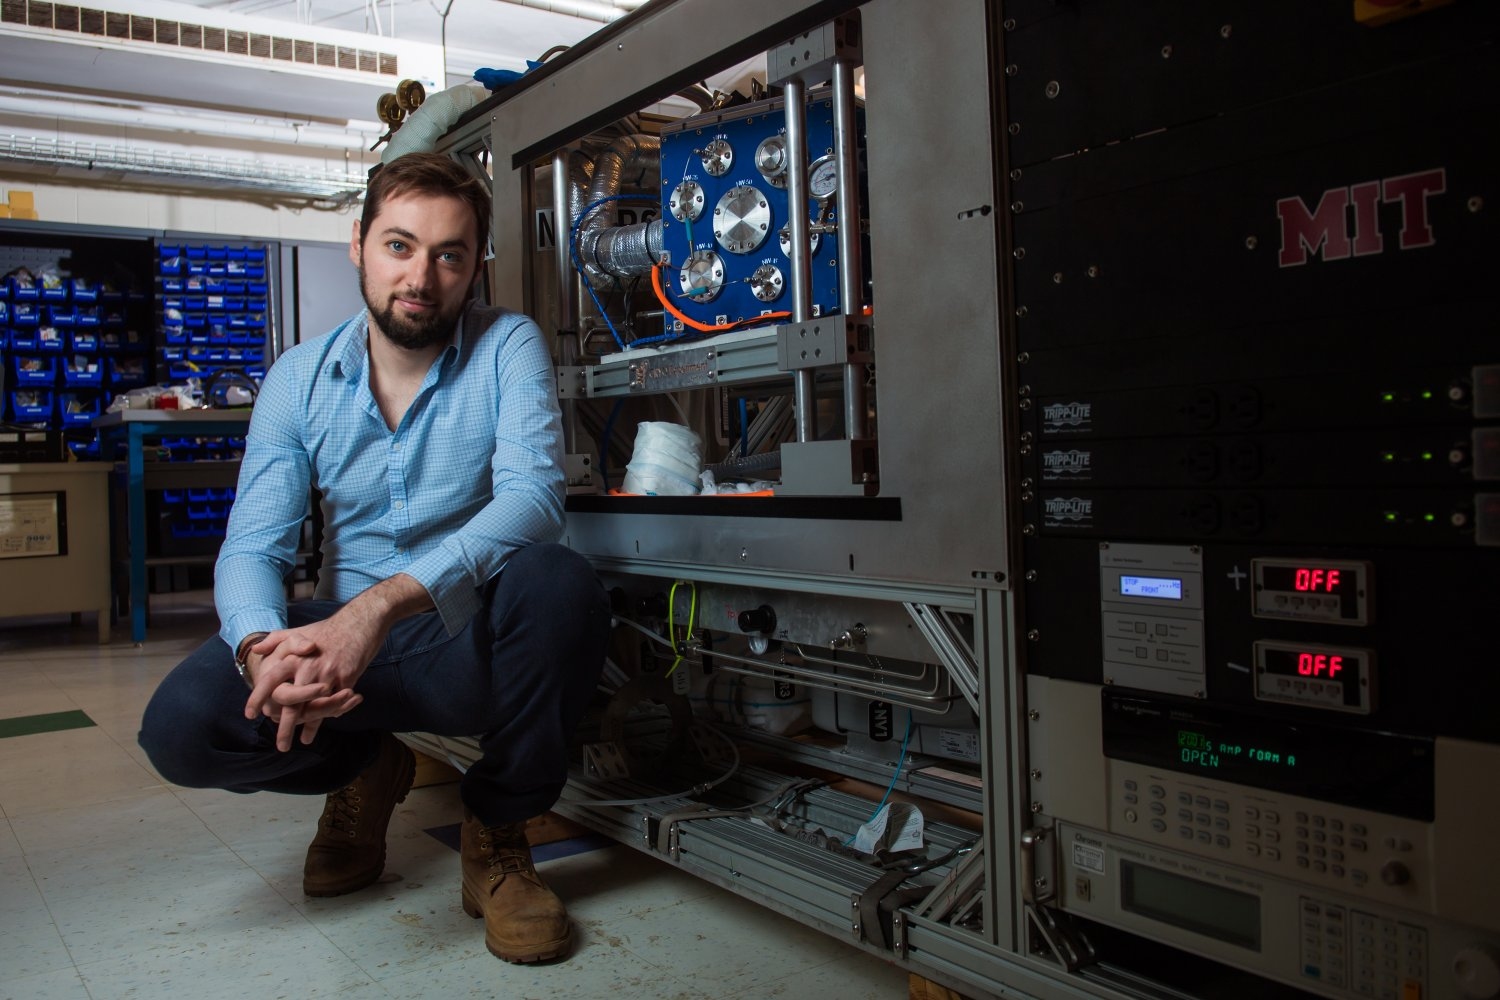 Florian Chavagnat's love of physics led him to study boiling heat transfer and how boiling would happen in the conditions that cryogenic rocket fuel will encounter in space.